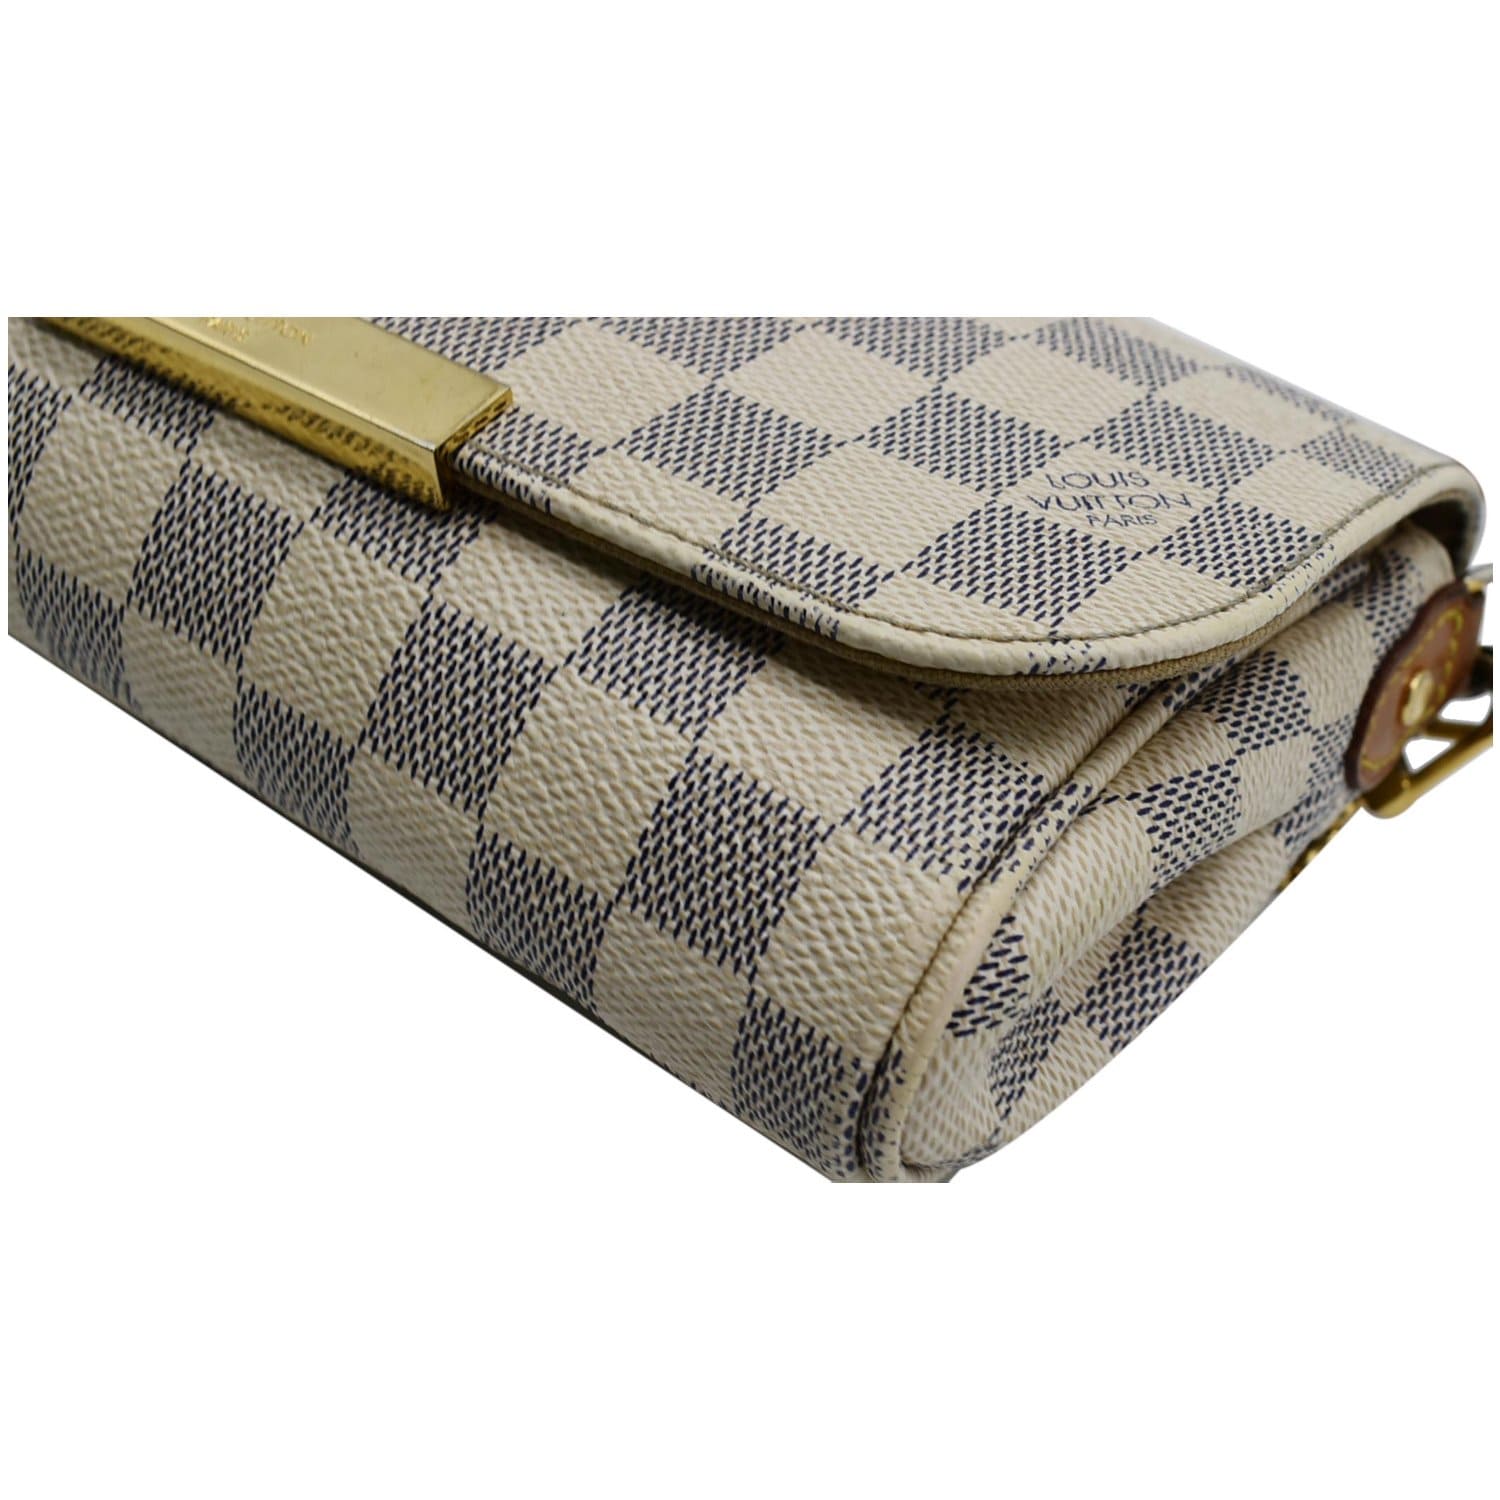 Félicie Pochette Damier Azur Canvas - Wallets and Small Leather Goods